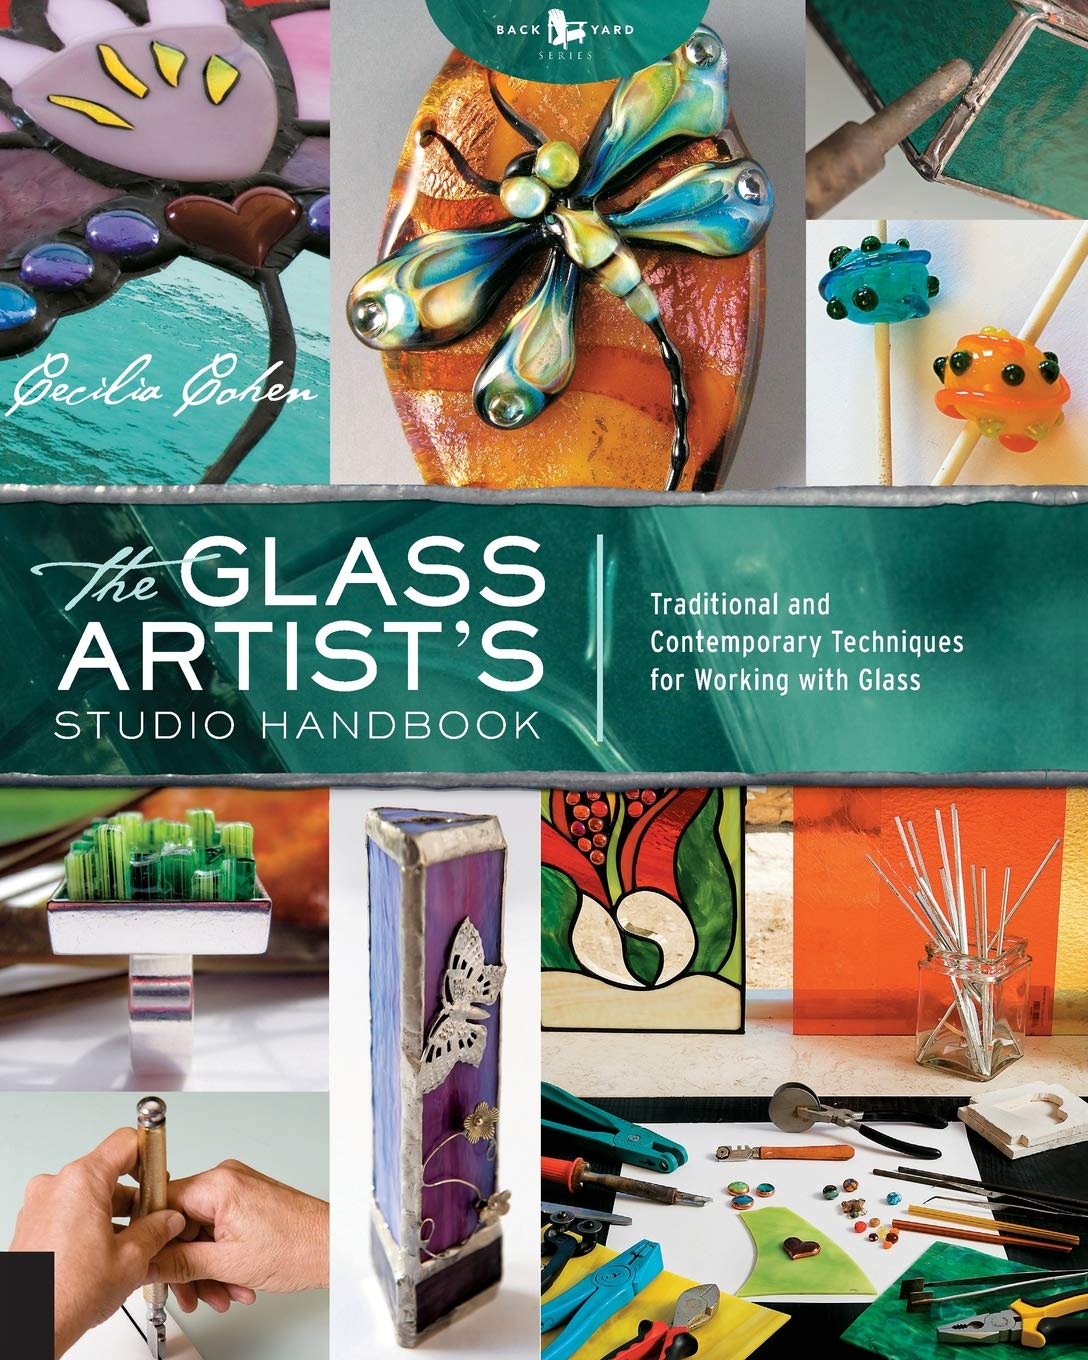 Livre ISBN 1592536972 The Glass Artist's Studio Handbook: Traditional and Contemporary Techniques for Working with Glass (Cecilia Cohen)